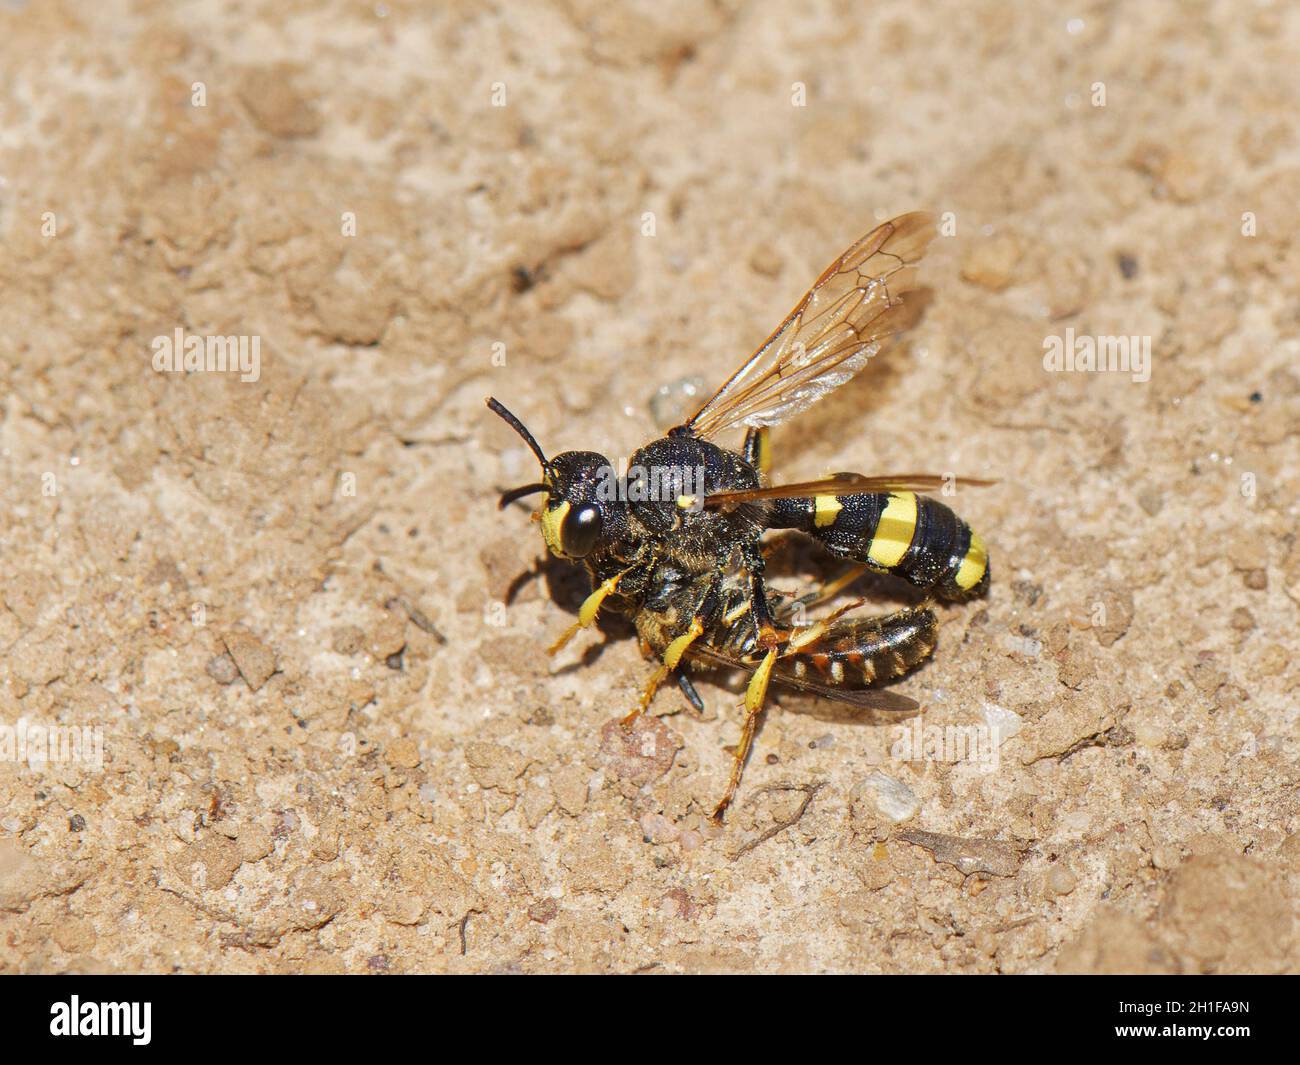 Ornate tailed digger wasp (Cerceris rybyensis) returning to its nest burrow with Common furrow bee (Lasioglossum calceatum) to feed its grubs, Wales. Stock Photo